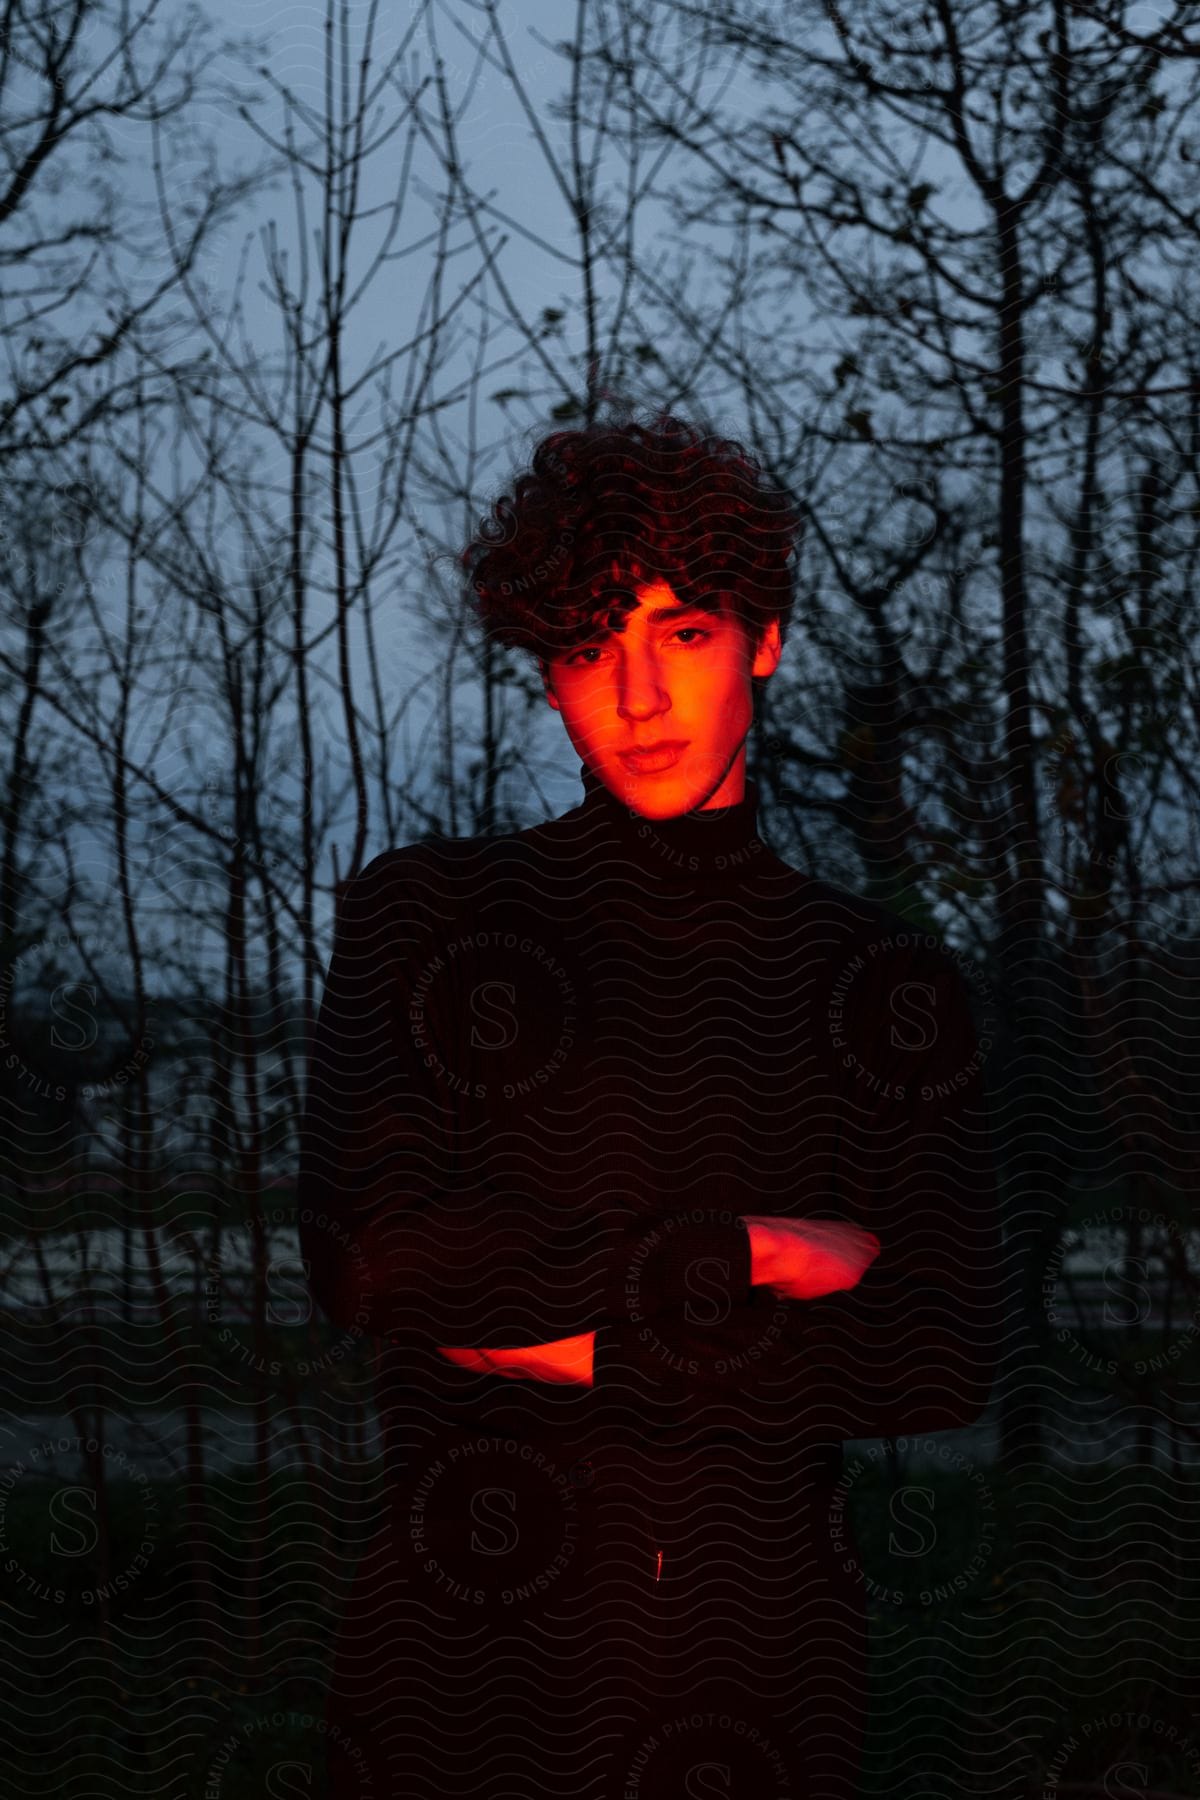 A man in a turtleneck sweater stands with crossed arms in front of leafless trees illuminated by amber light